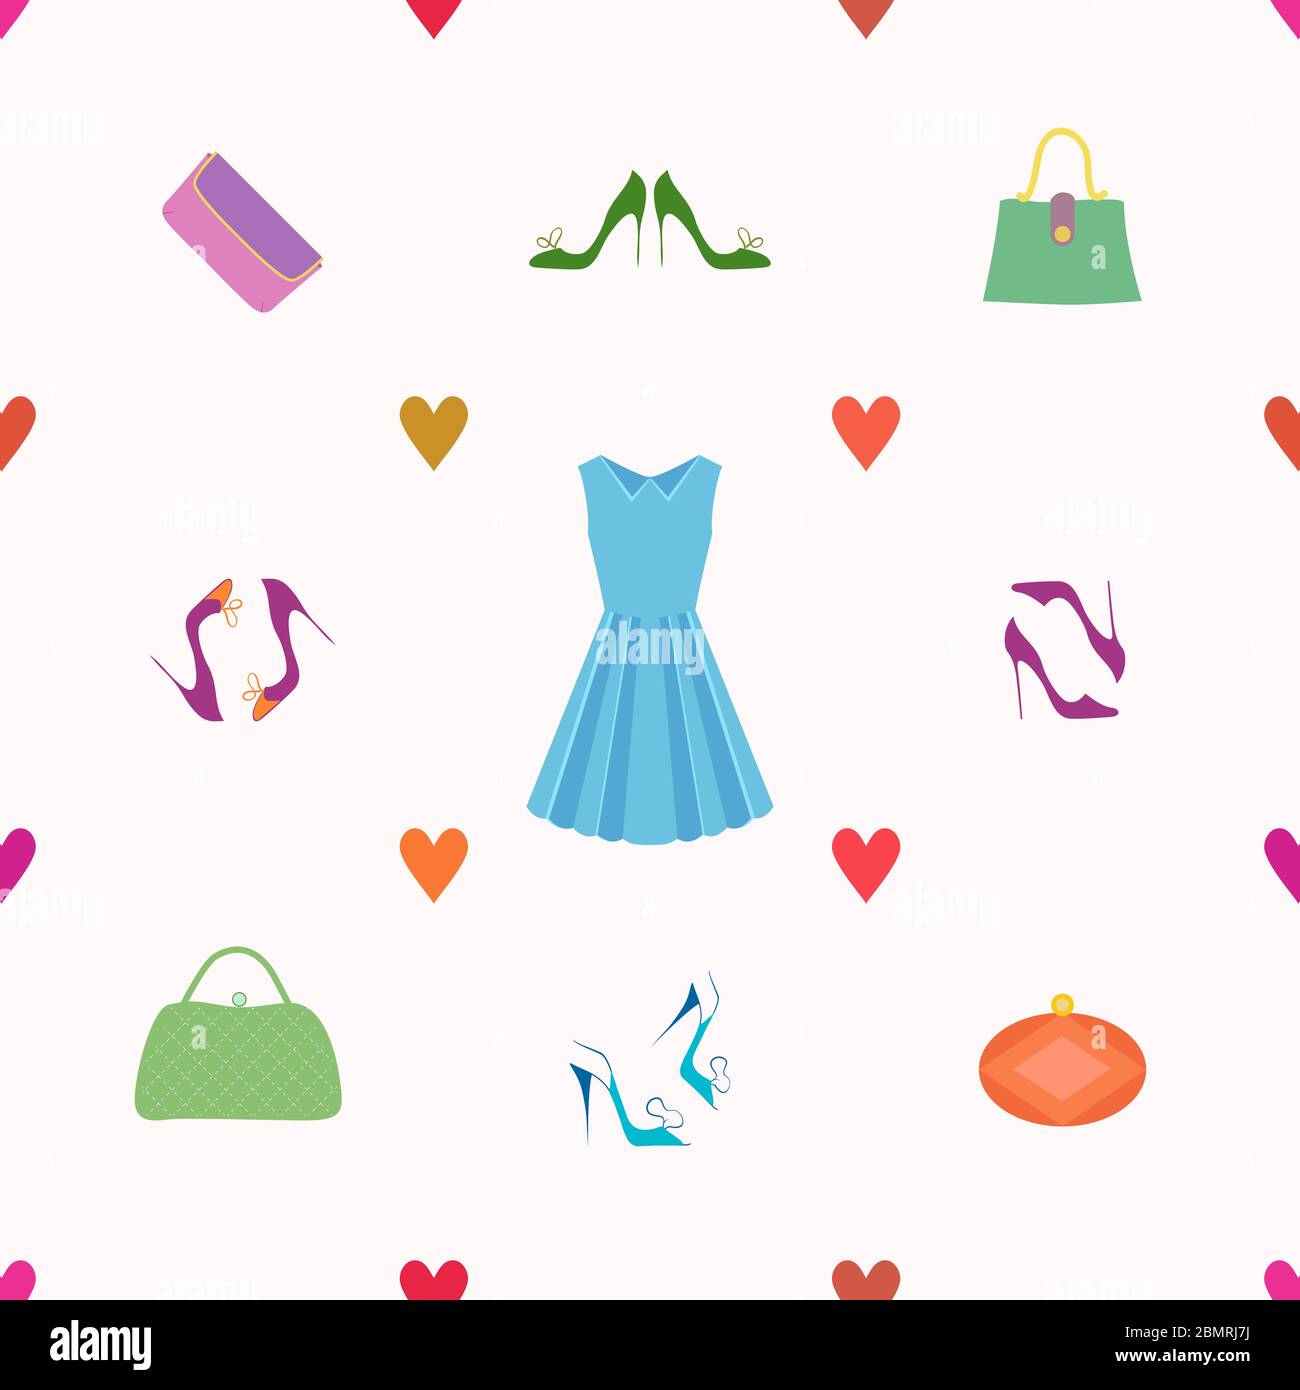 Seamless vector background of fashion items, dress, shoes and handbags, purses Stock Vector